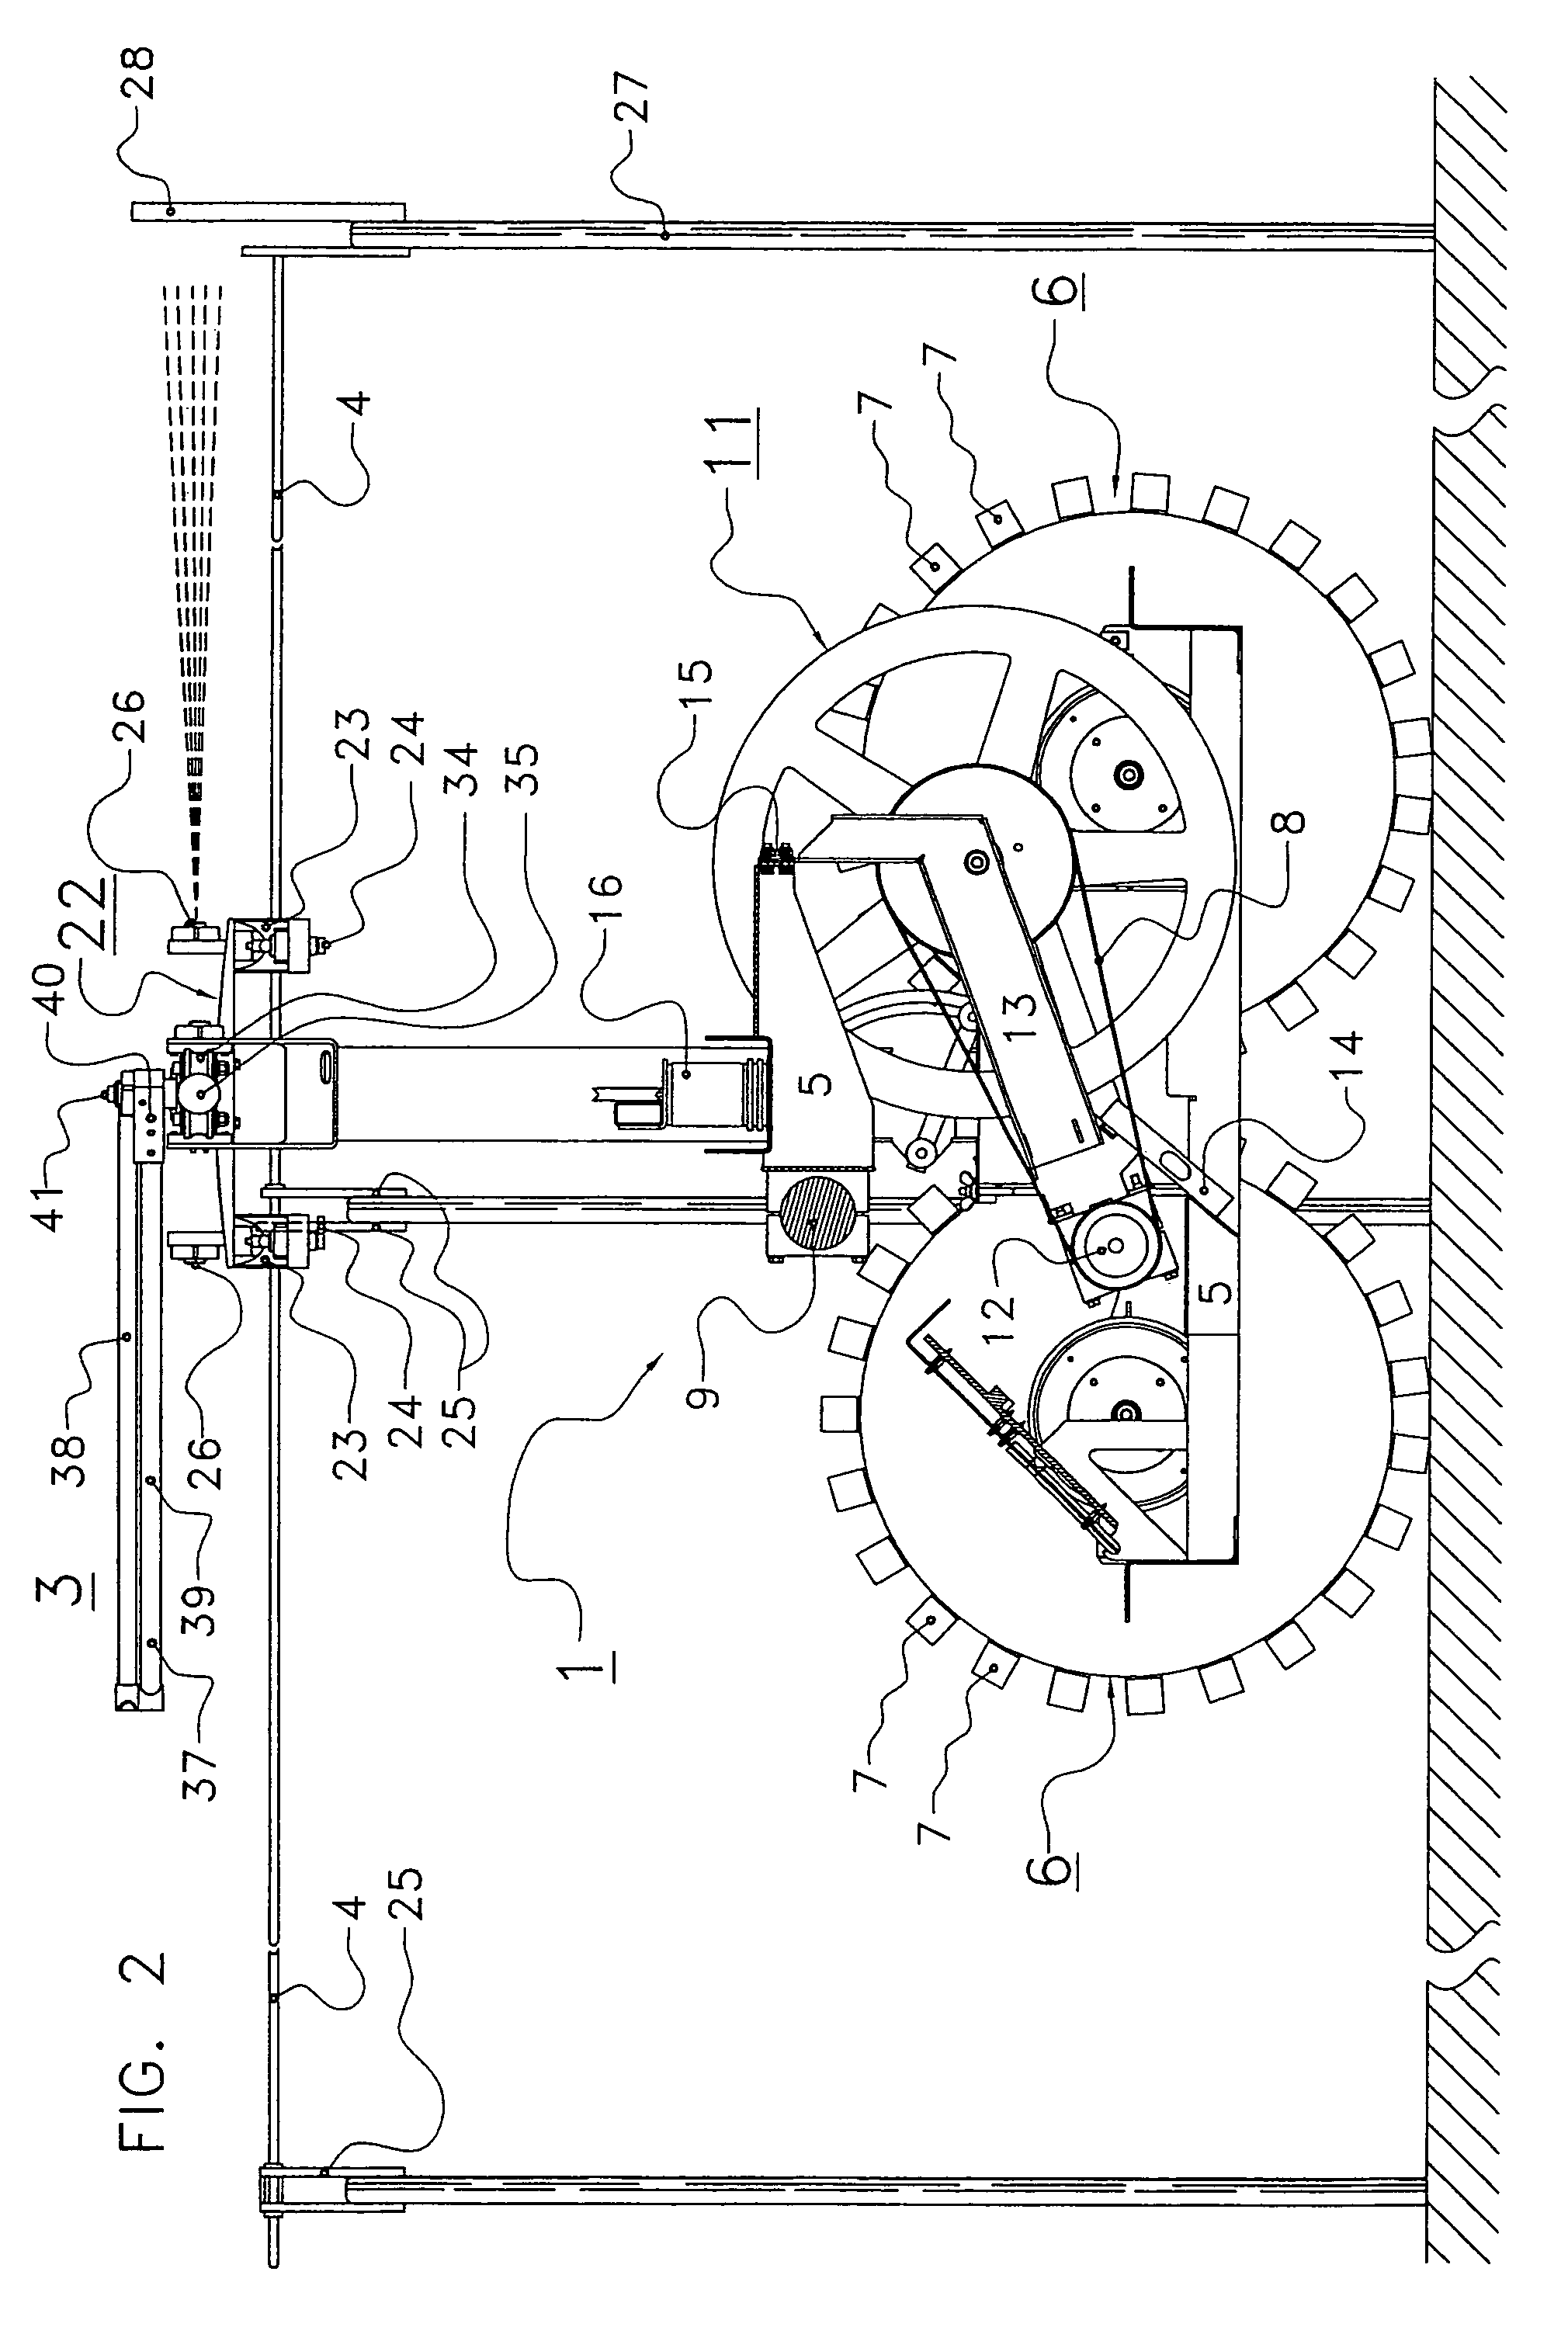 Device for demarcating an area